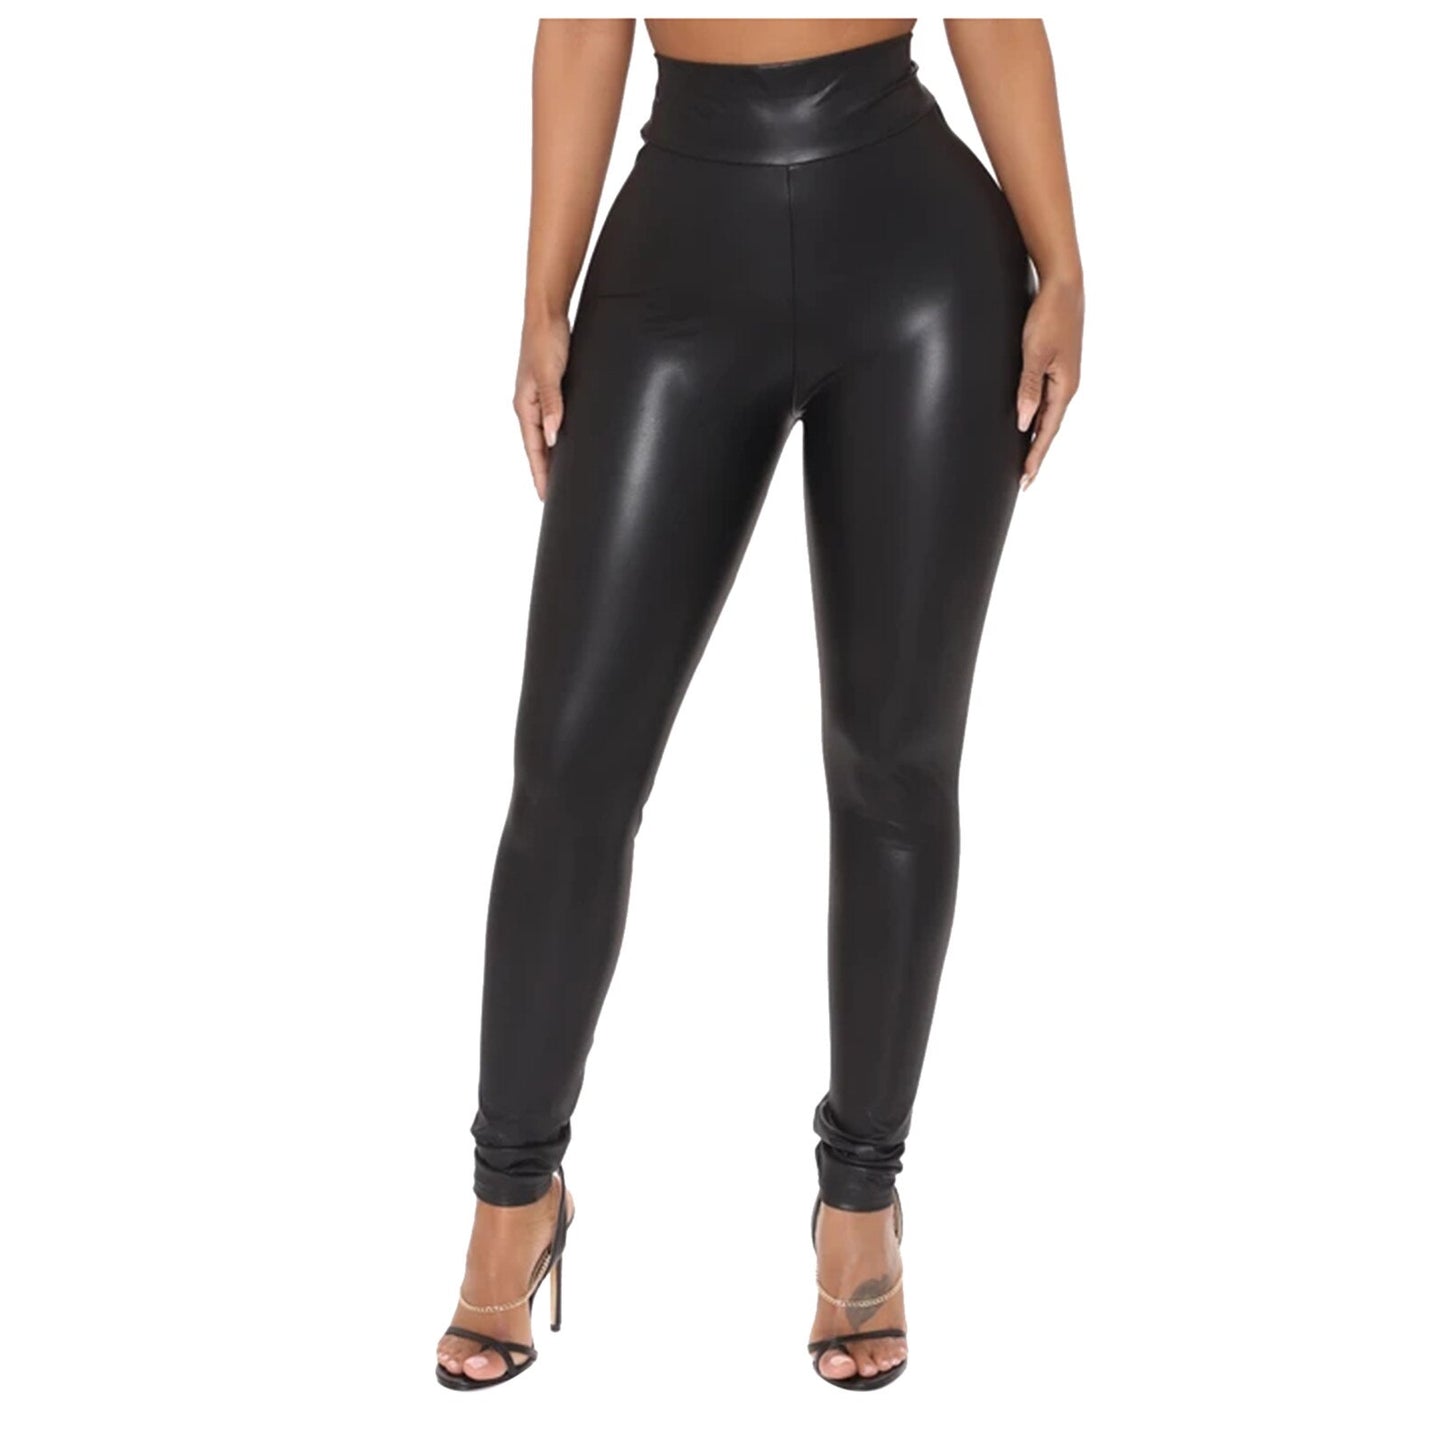 High Waisted Slim Black Faux Leather Trousers Women Abdominal Control Push Up Stretch Fitness Treggings Pants